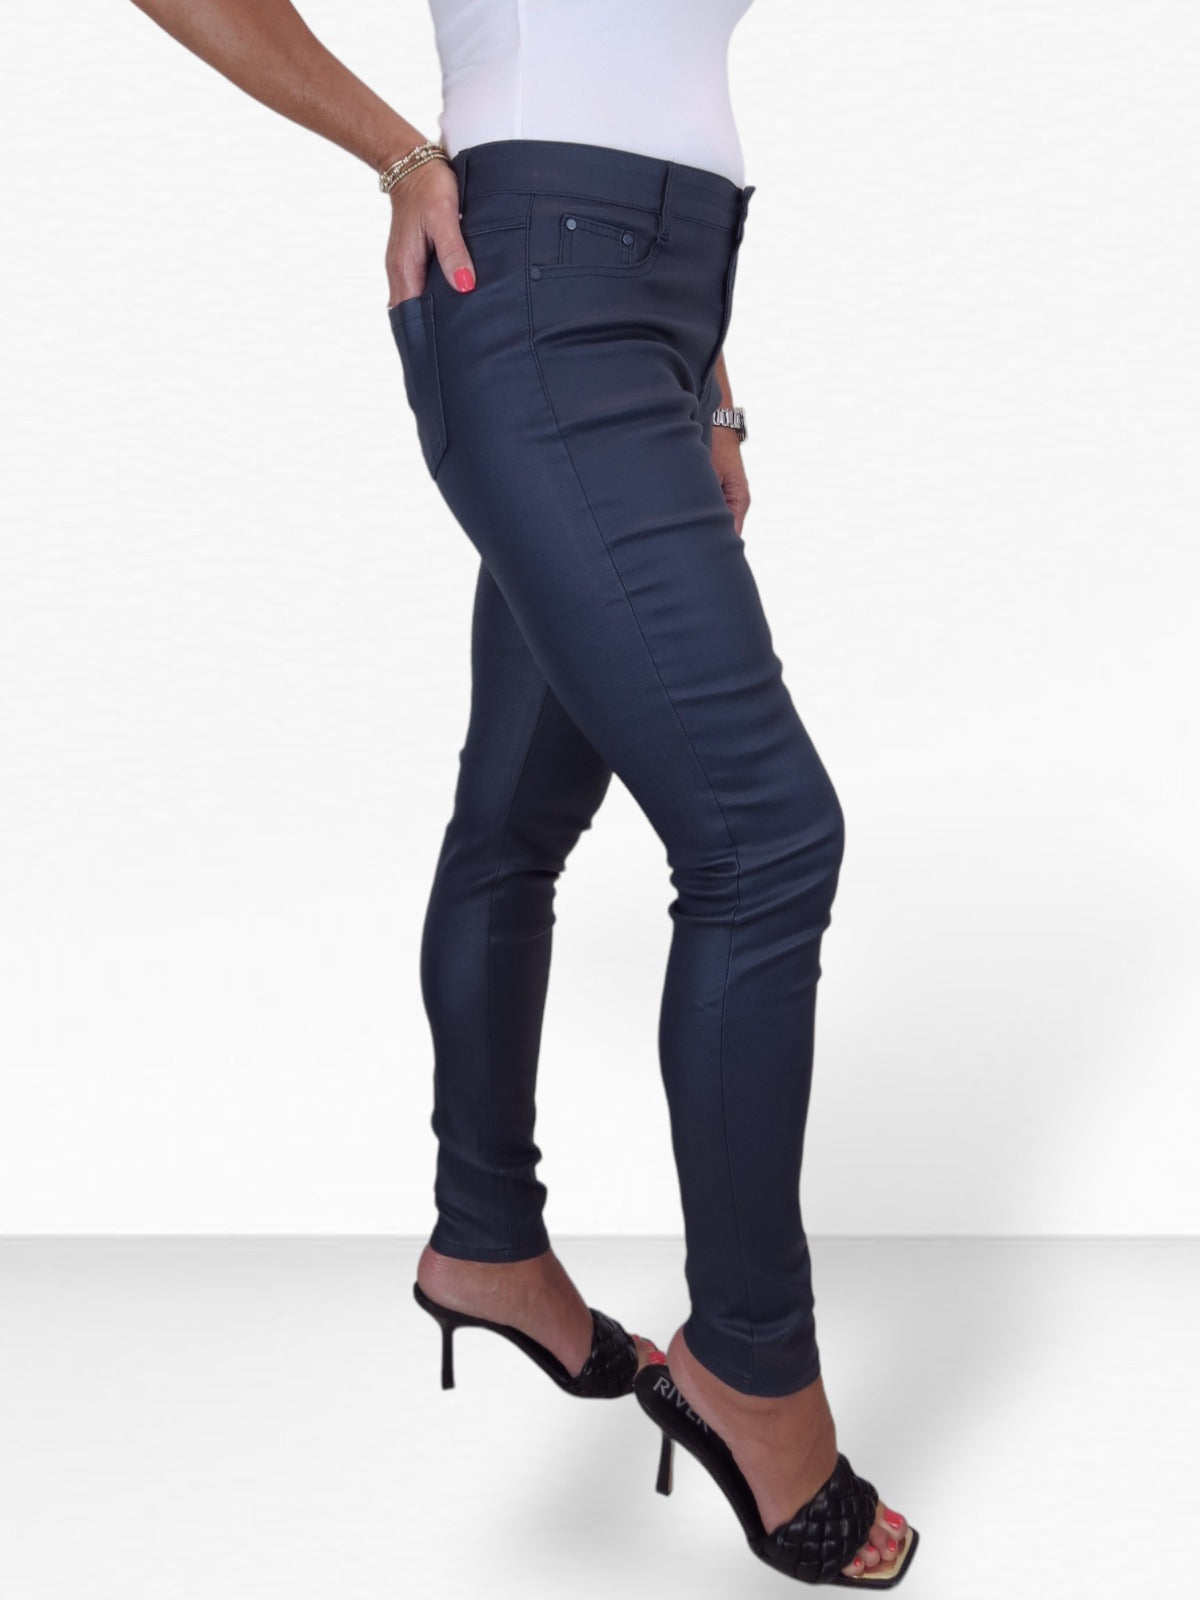 Womens High Waist Stretch Leather Look Jeans Navy Blue